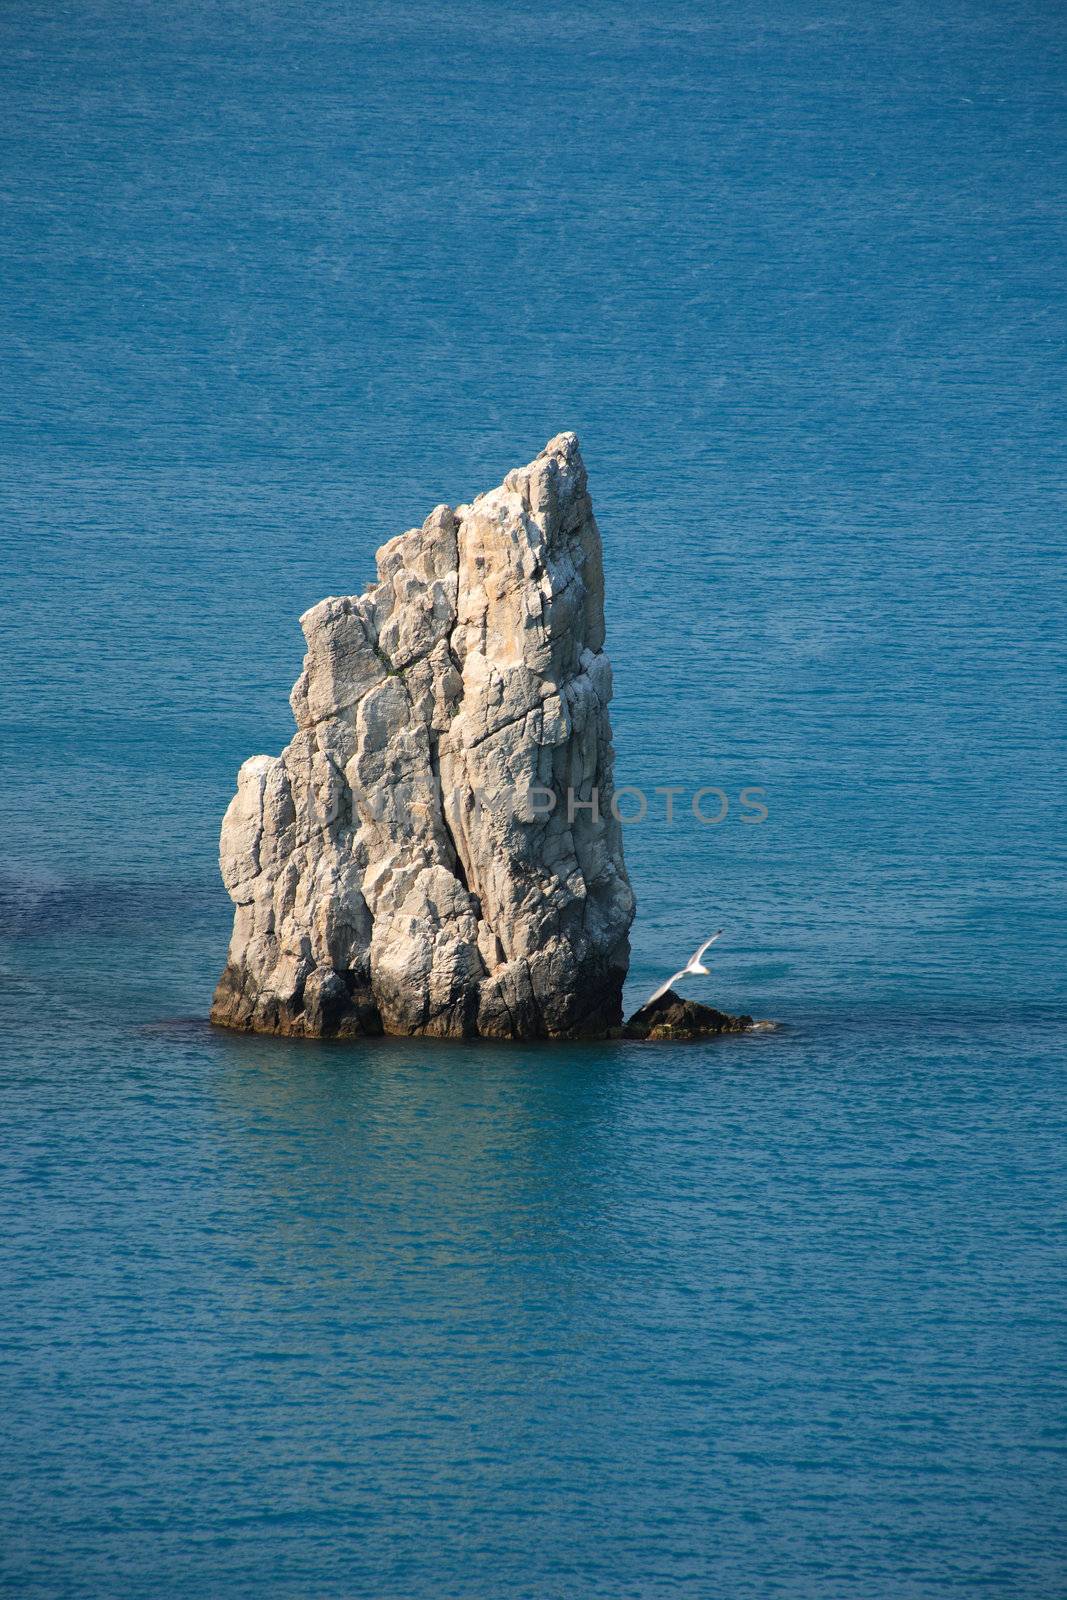 High lonely rock like a sail in a sea